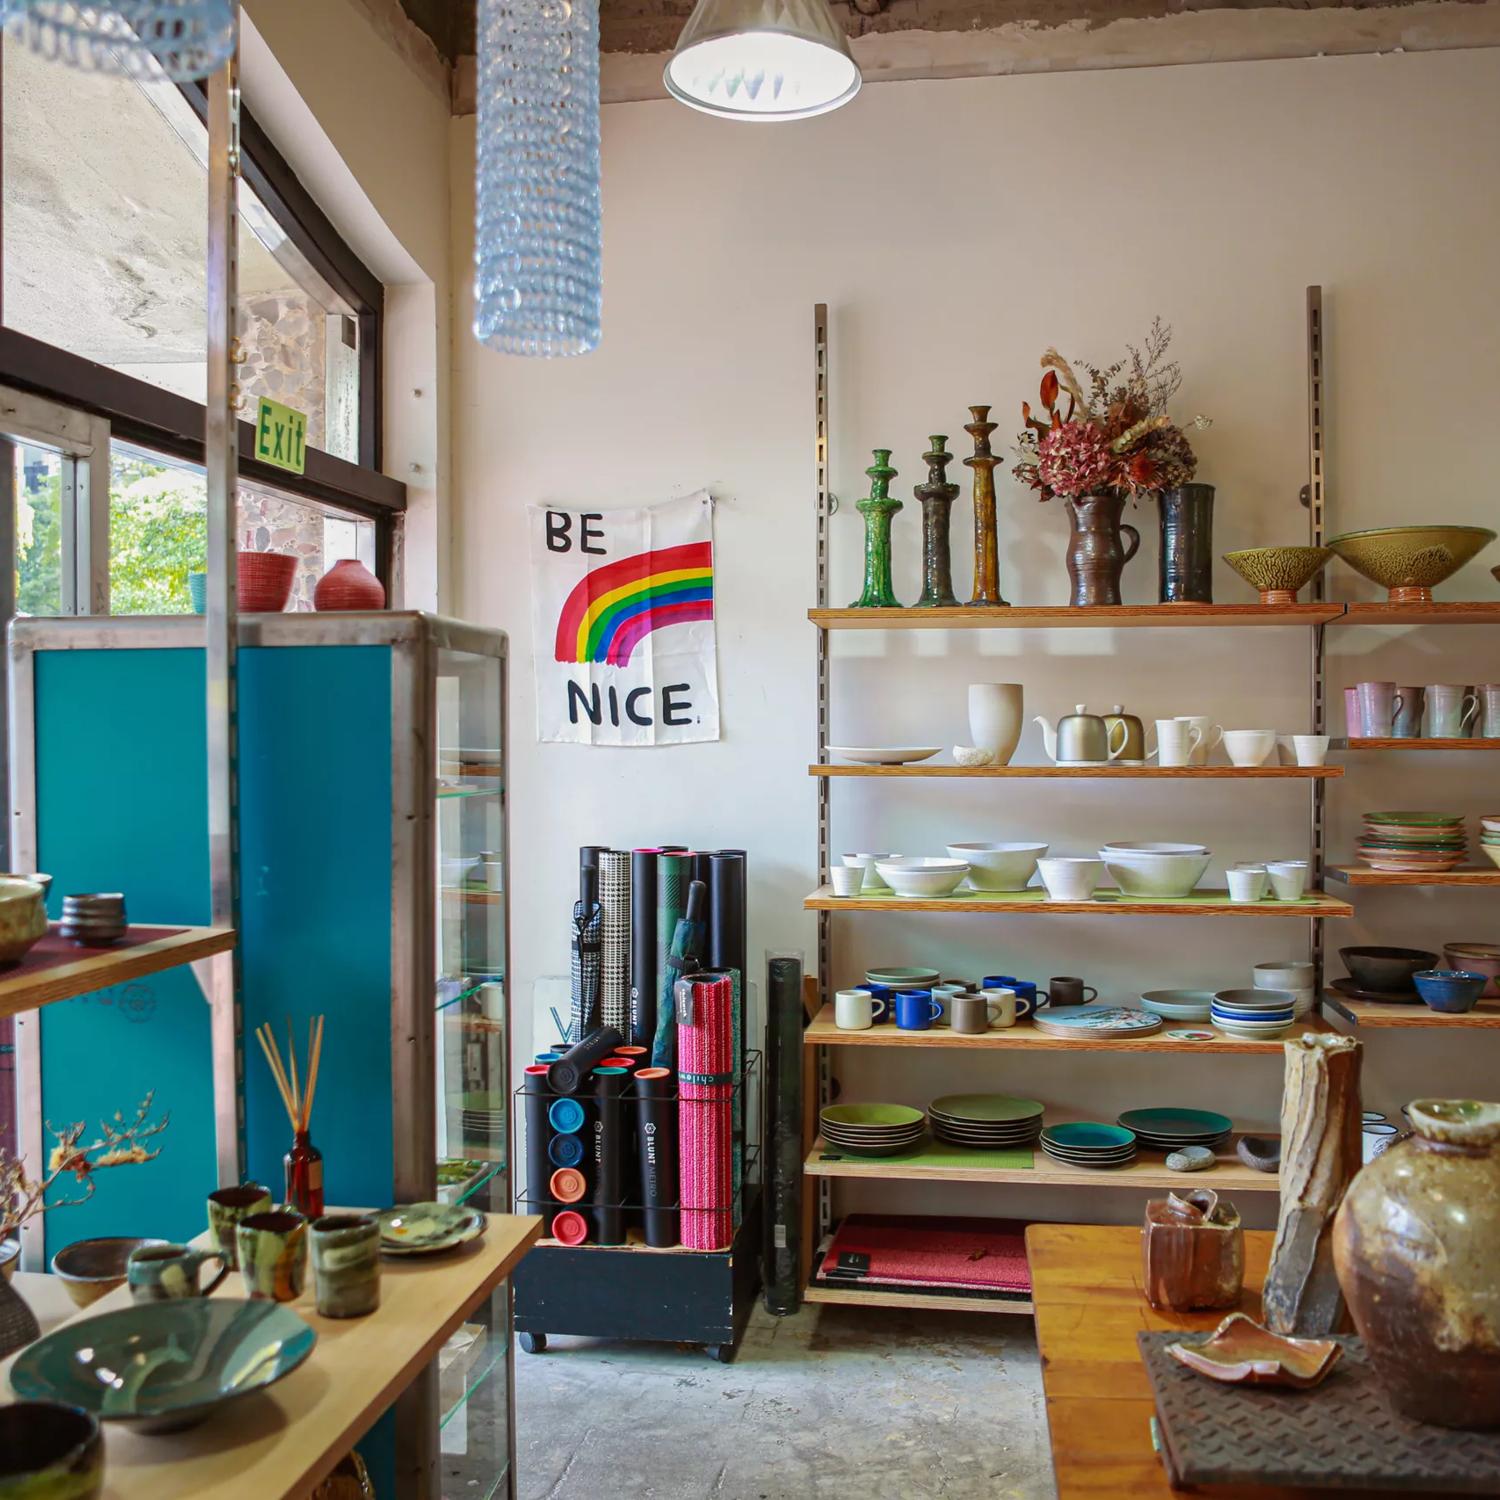 Inside Vessel gift shop, we can see a large variety of dinnerware on the shelves.